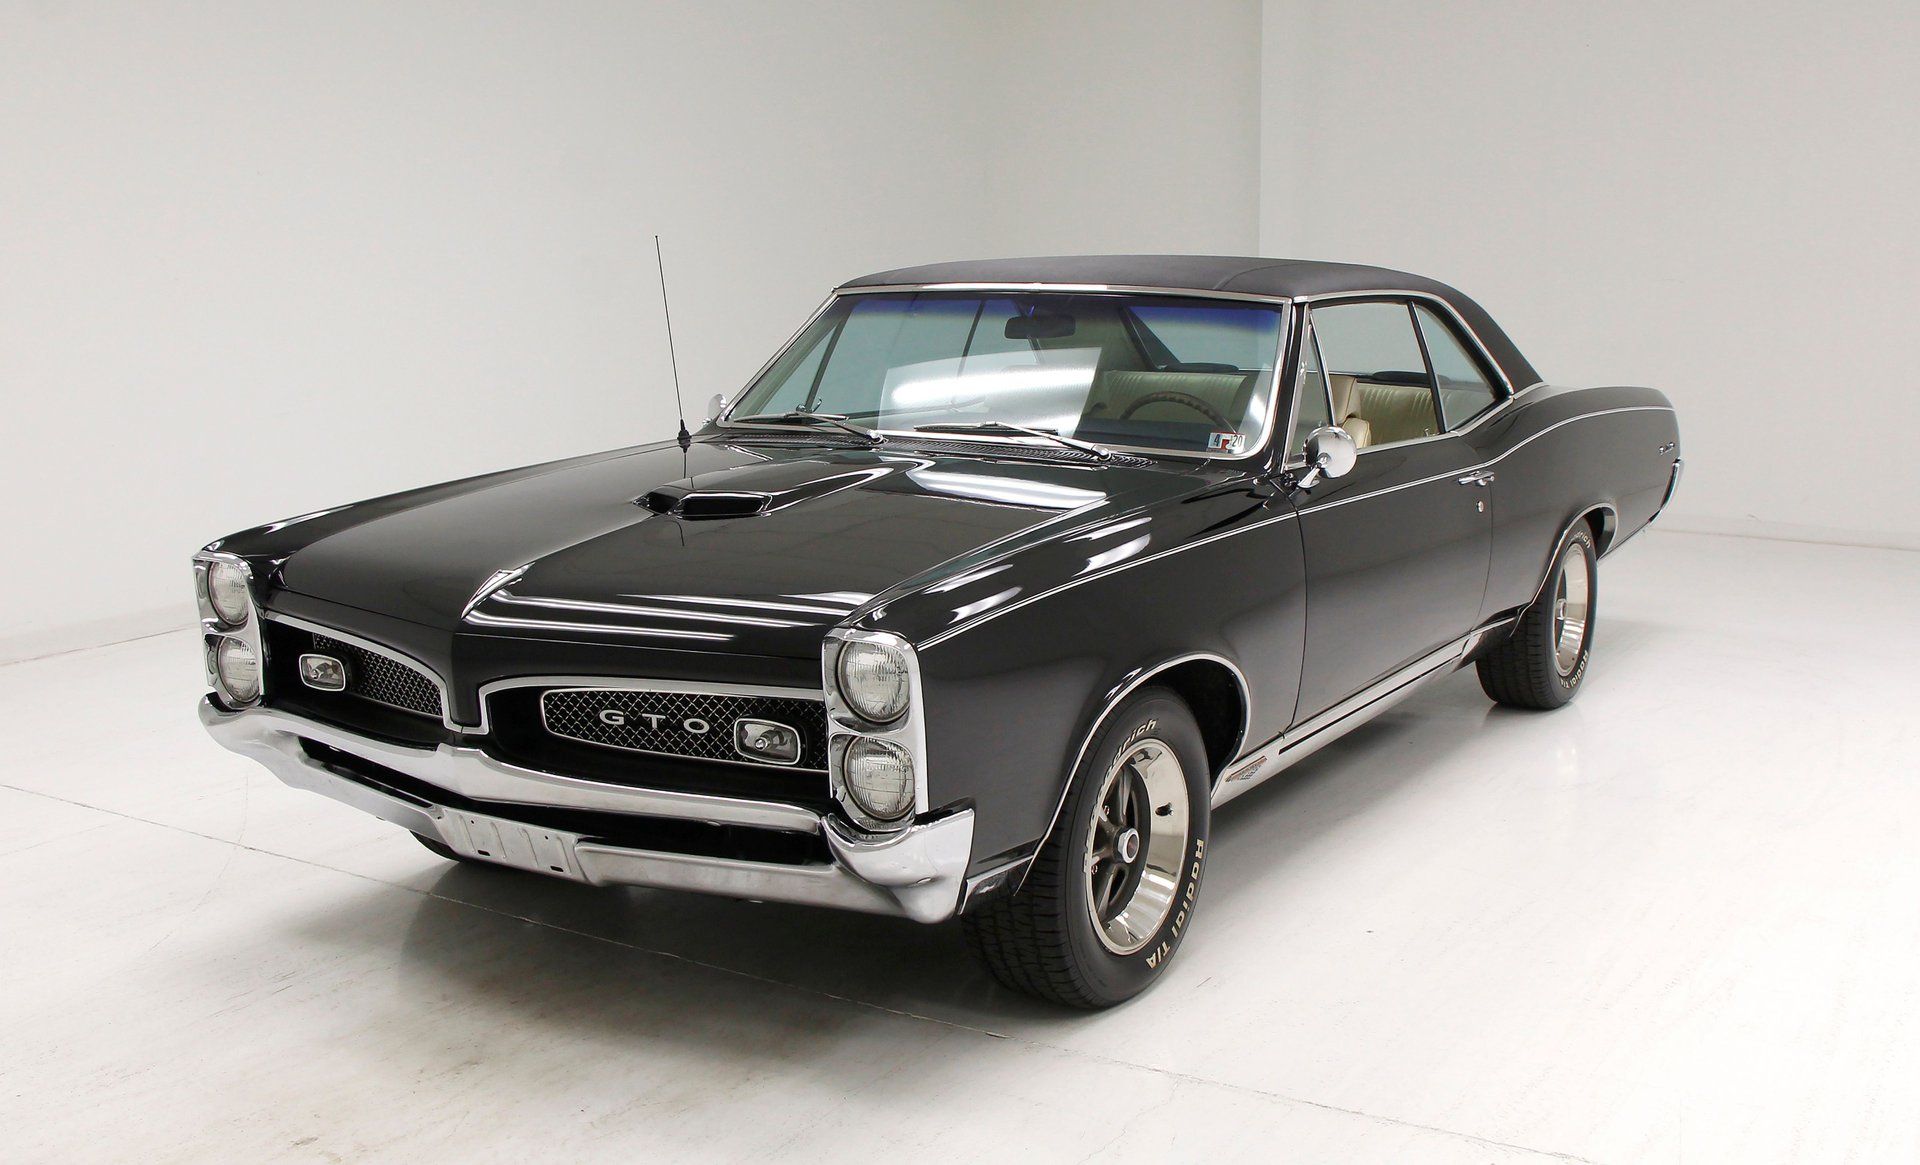 1967 Pontiac GTO being sold